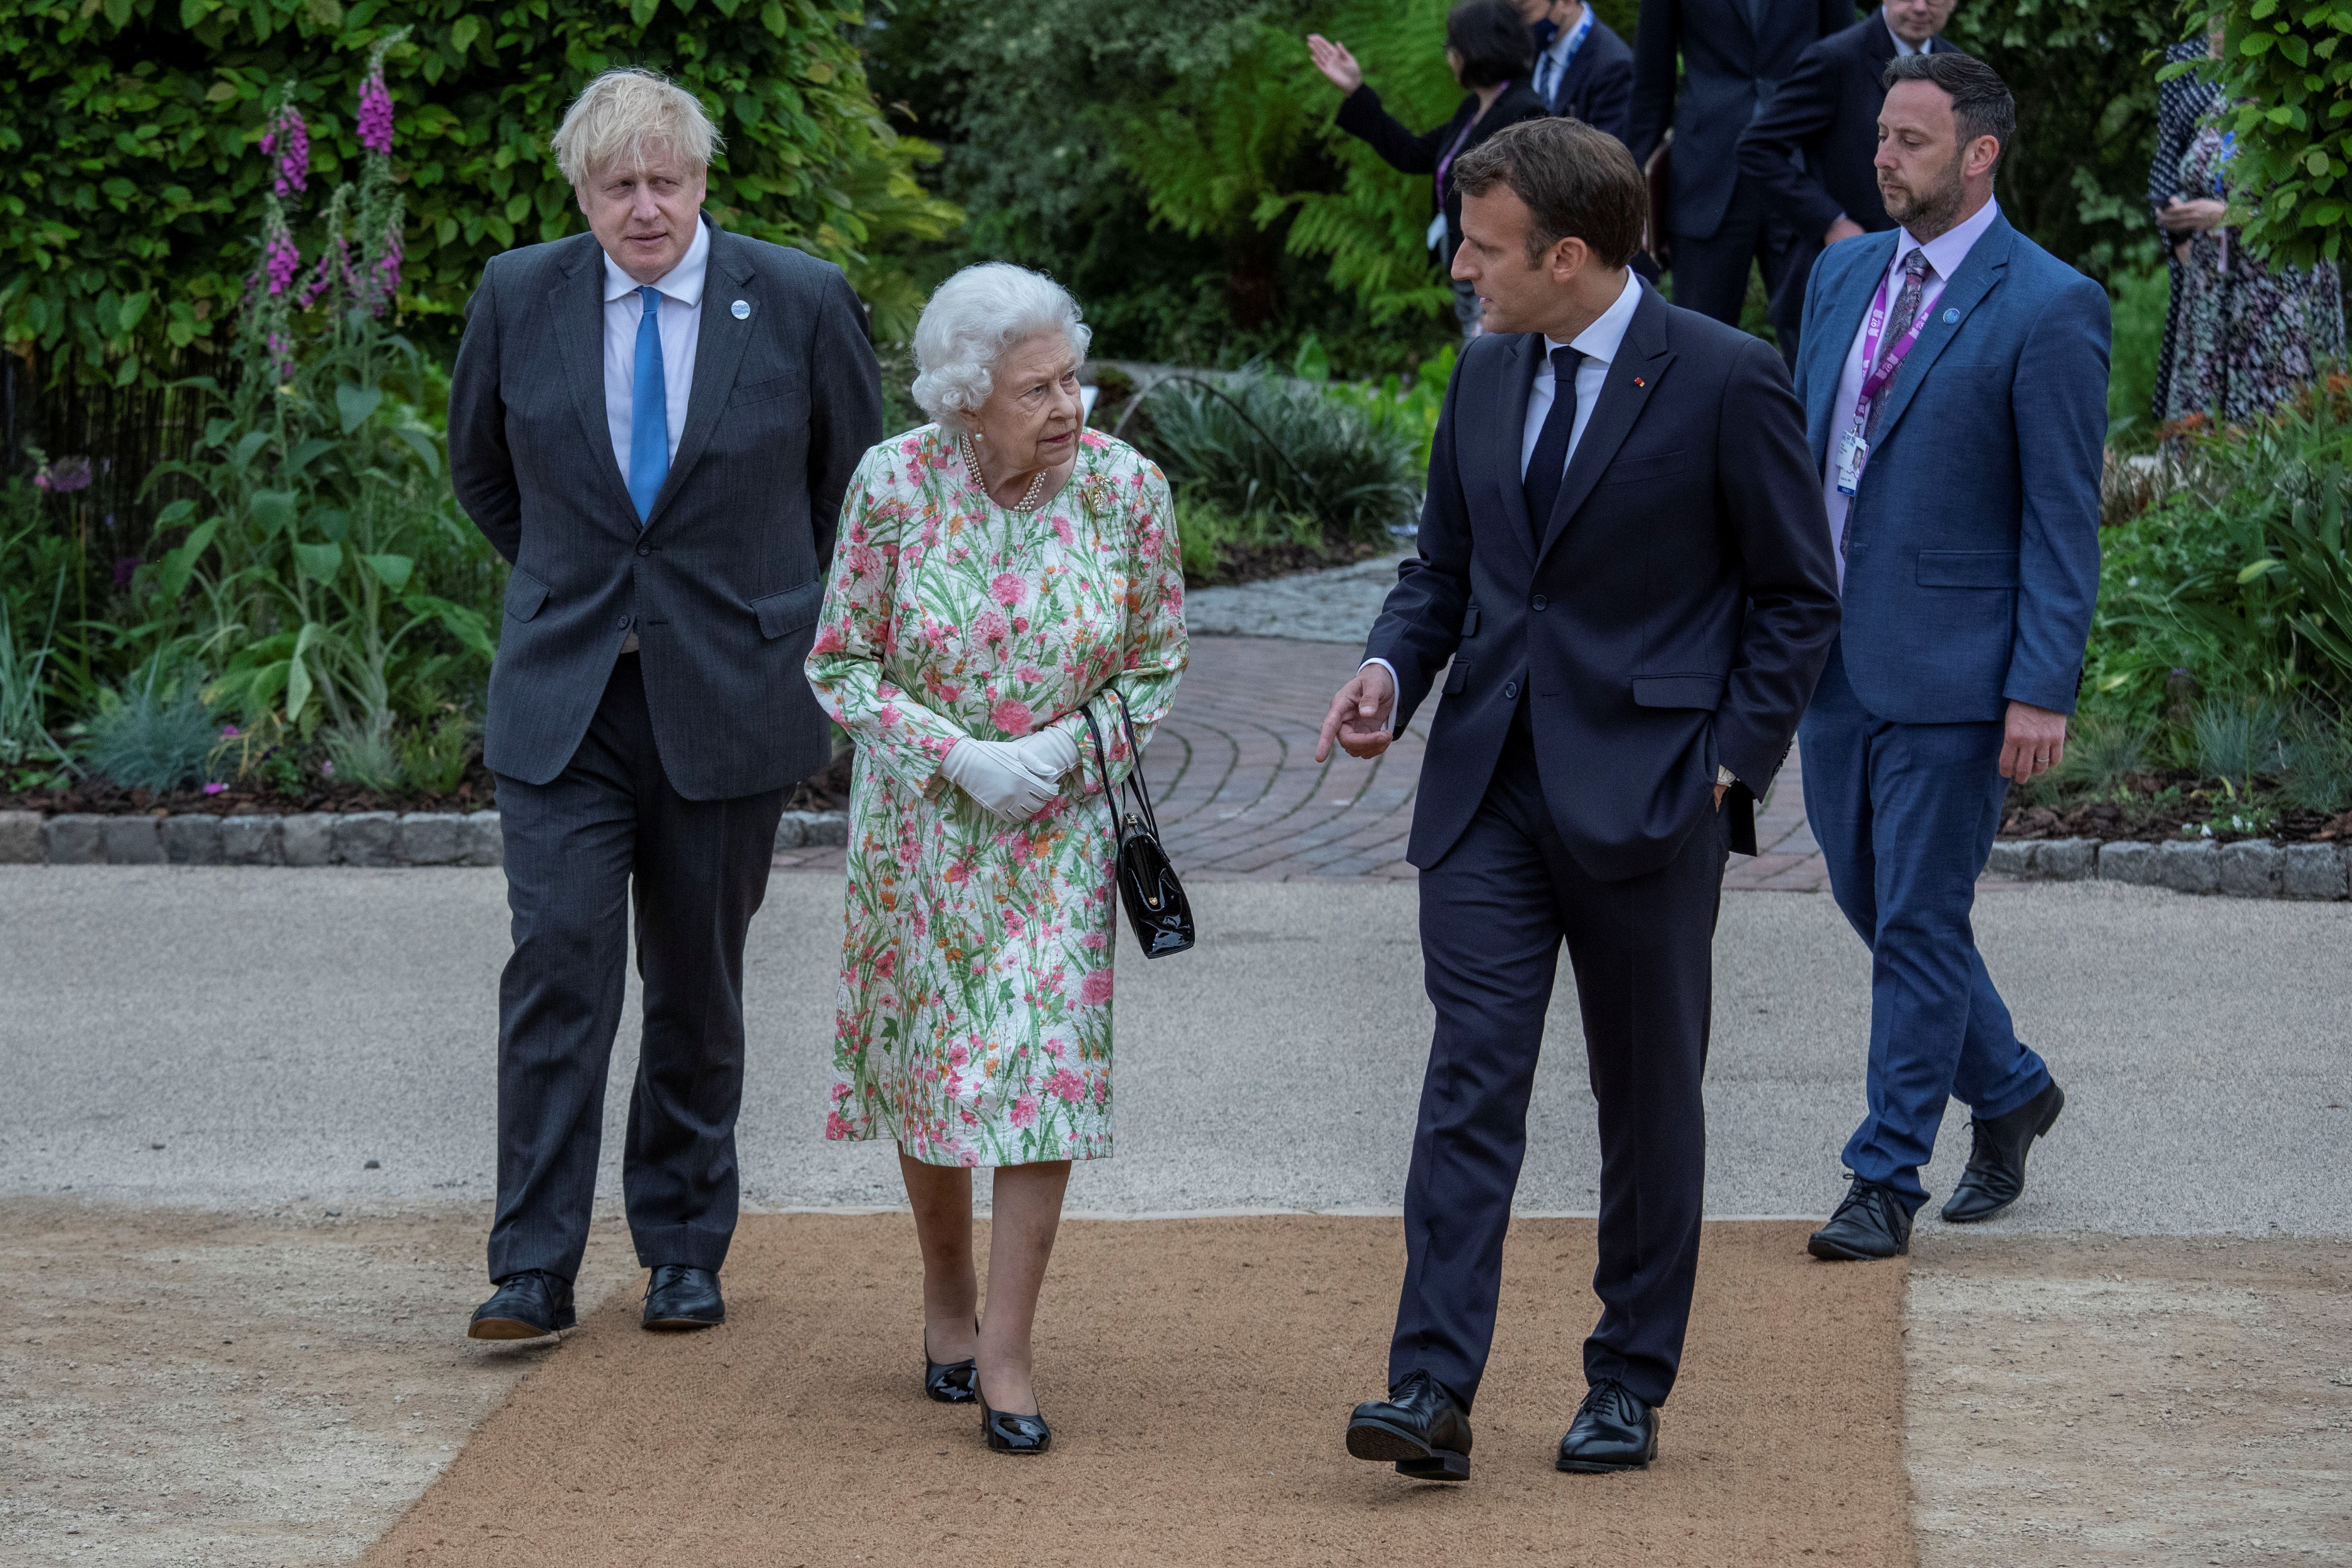 The Latest: Queen Elizabeth II hosts G-7 leaders, spouses